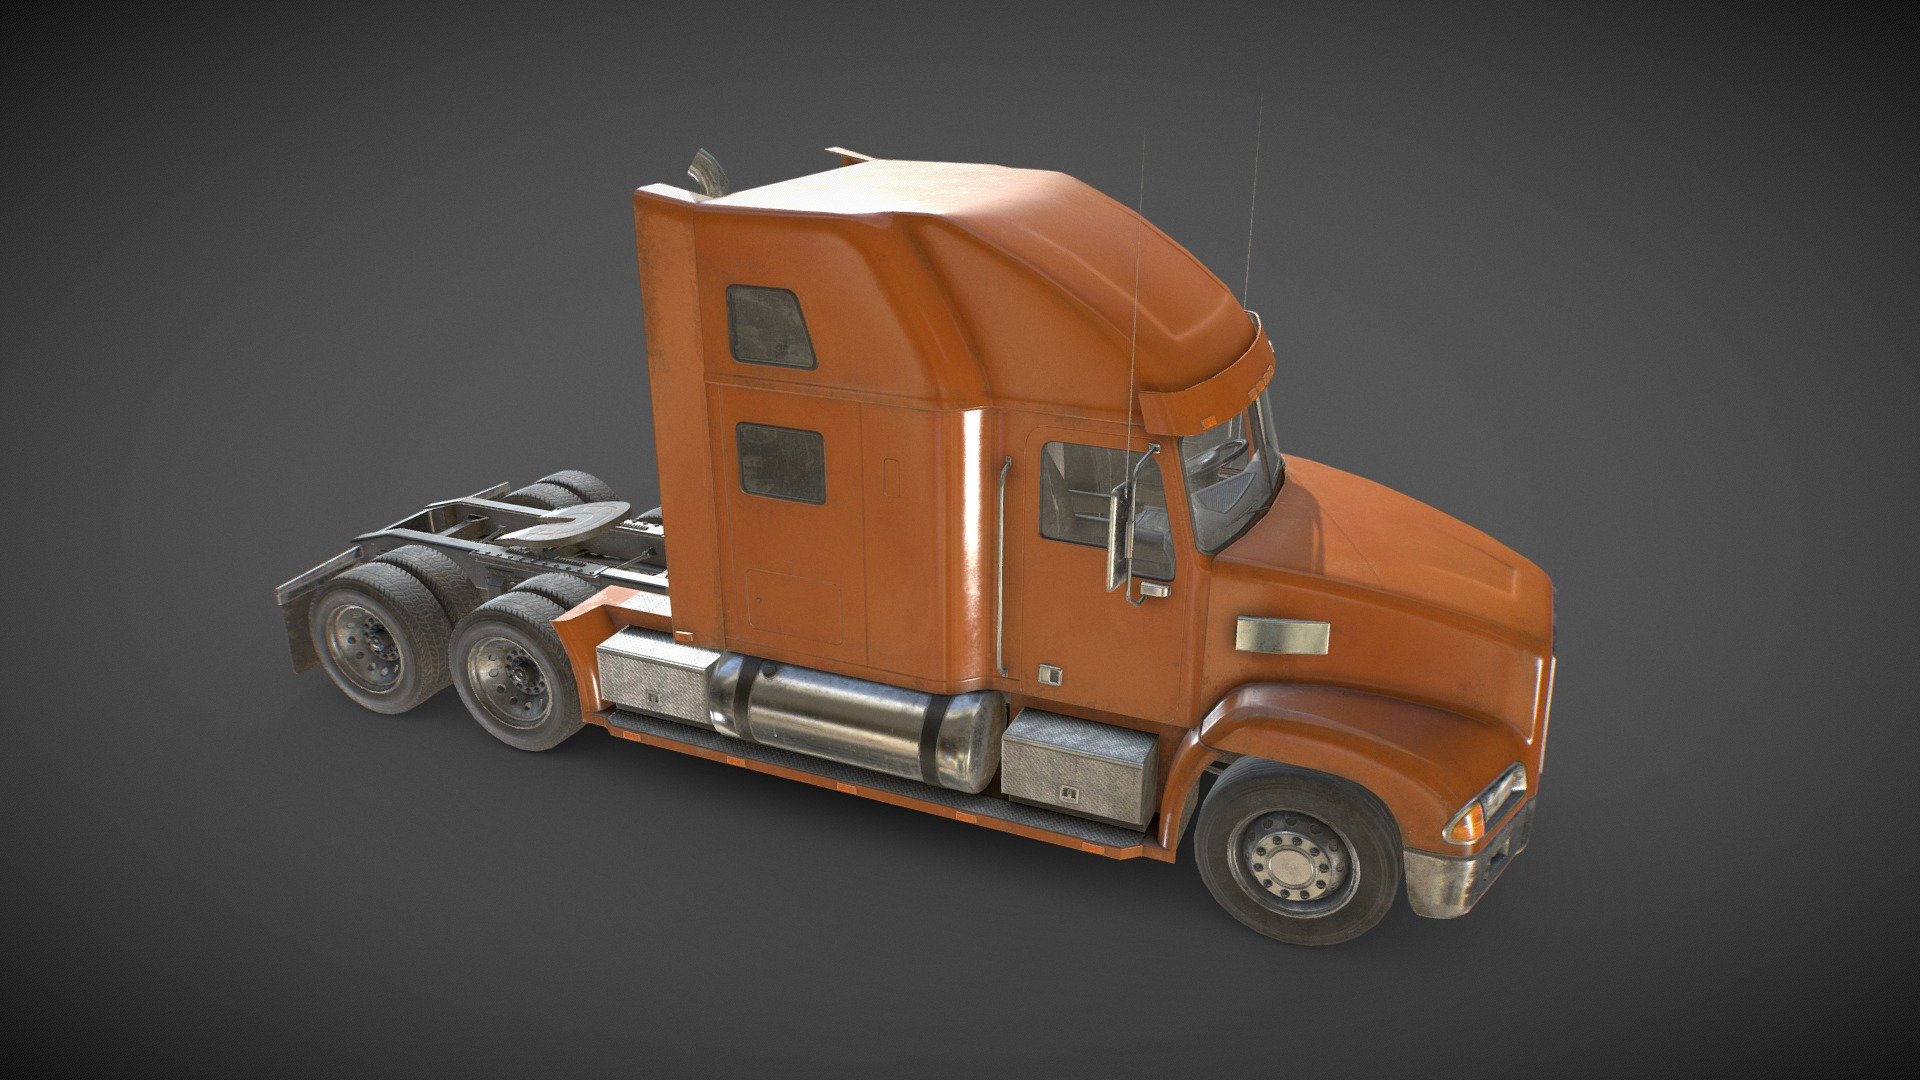 Low Poly 3D model of an Orange Semi Truck Tractor with sleeper cab:

The model is low poly (36.071 Tris), gameready and has cabin doors and wheels ready to rig/animate (not animated):


Real-world scale and centered.
The unit of measurement used for the model is centimeters
Polys: 18.562 (Converted to triangles: 36.071)
Cabin interior fully modeled and textured.
All Doors, wheels, and steering wheel can be easily rigged/animated.
PBR textures made in Substance Painter
All branding and labels are custom made.
Average texel density:  674 px/m
Second uv channel included for lightmaps.
Packed ORM tectures included for Unreal.

Maps sizes: 


Body: 4096
Chassis: 4096
Interior: 4096
Wheels: 2048
Windows: 1024

Provided Maps:


Albedo
Normal
Roughness
Metalness
AO
Opacity included in Albedo (windows)
Emissive

Formats Incuded - MAX / BLEND / OBJ / FBX 

This model can be used for any game, film, personal project, etc. You may not resell or redistribute any content - Semi Truck Tractor - Orange - Low Poly - Buy Royalty Free 3D model by MSWoodvine 3d model